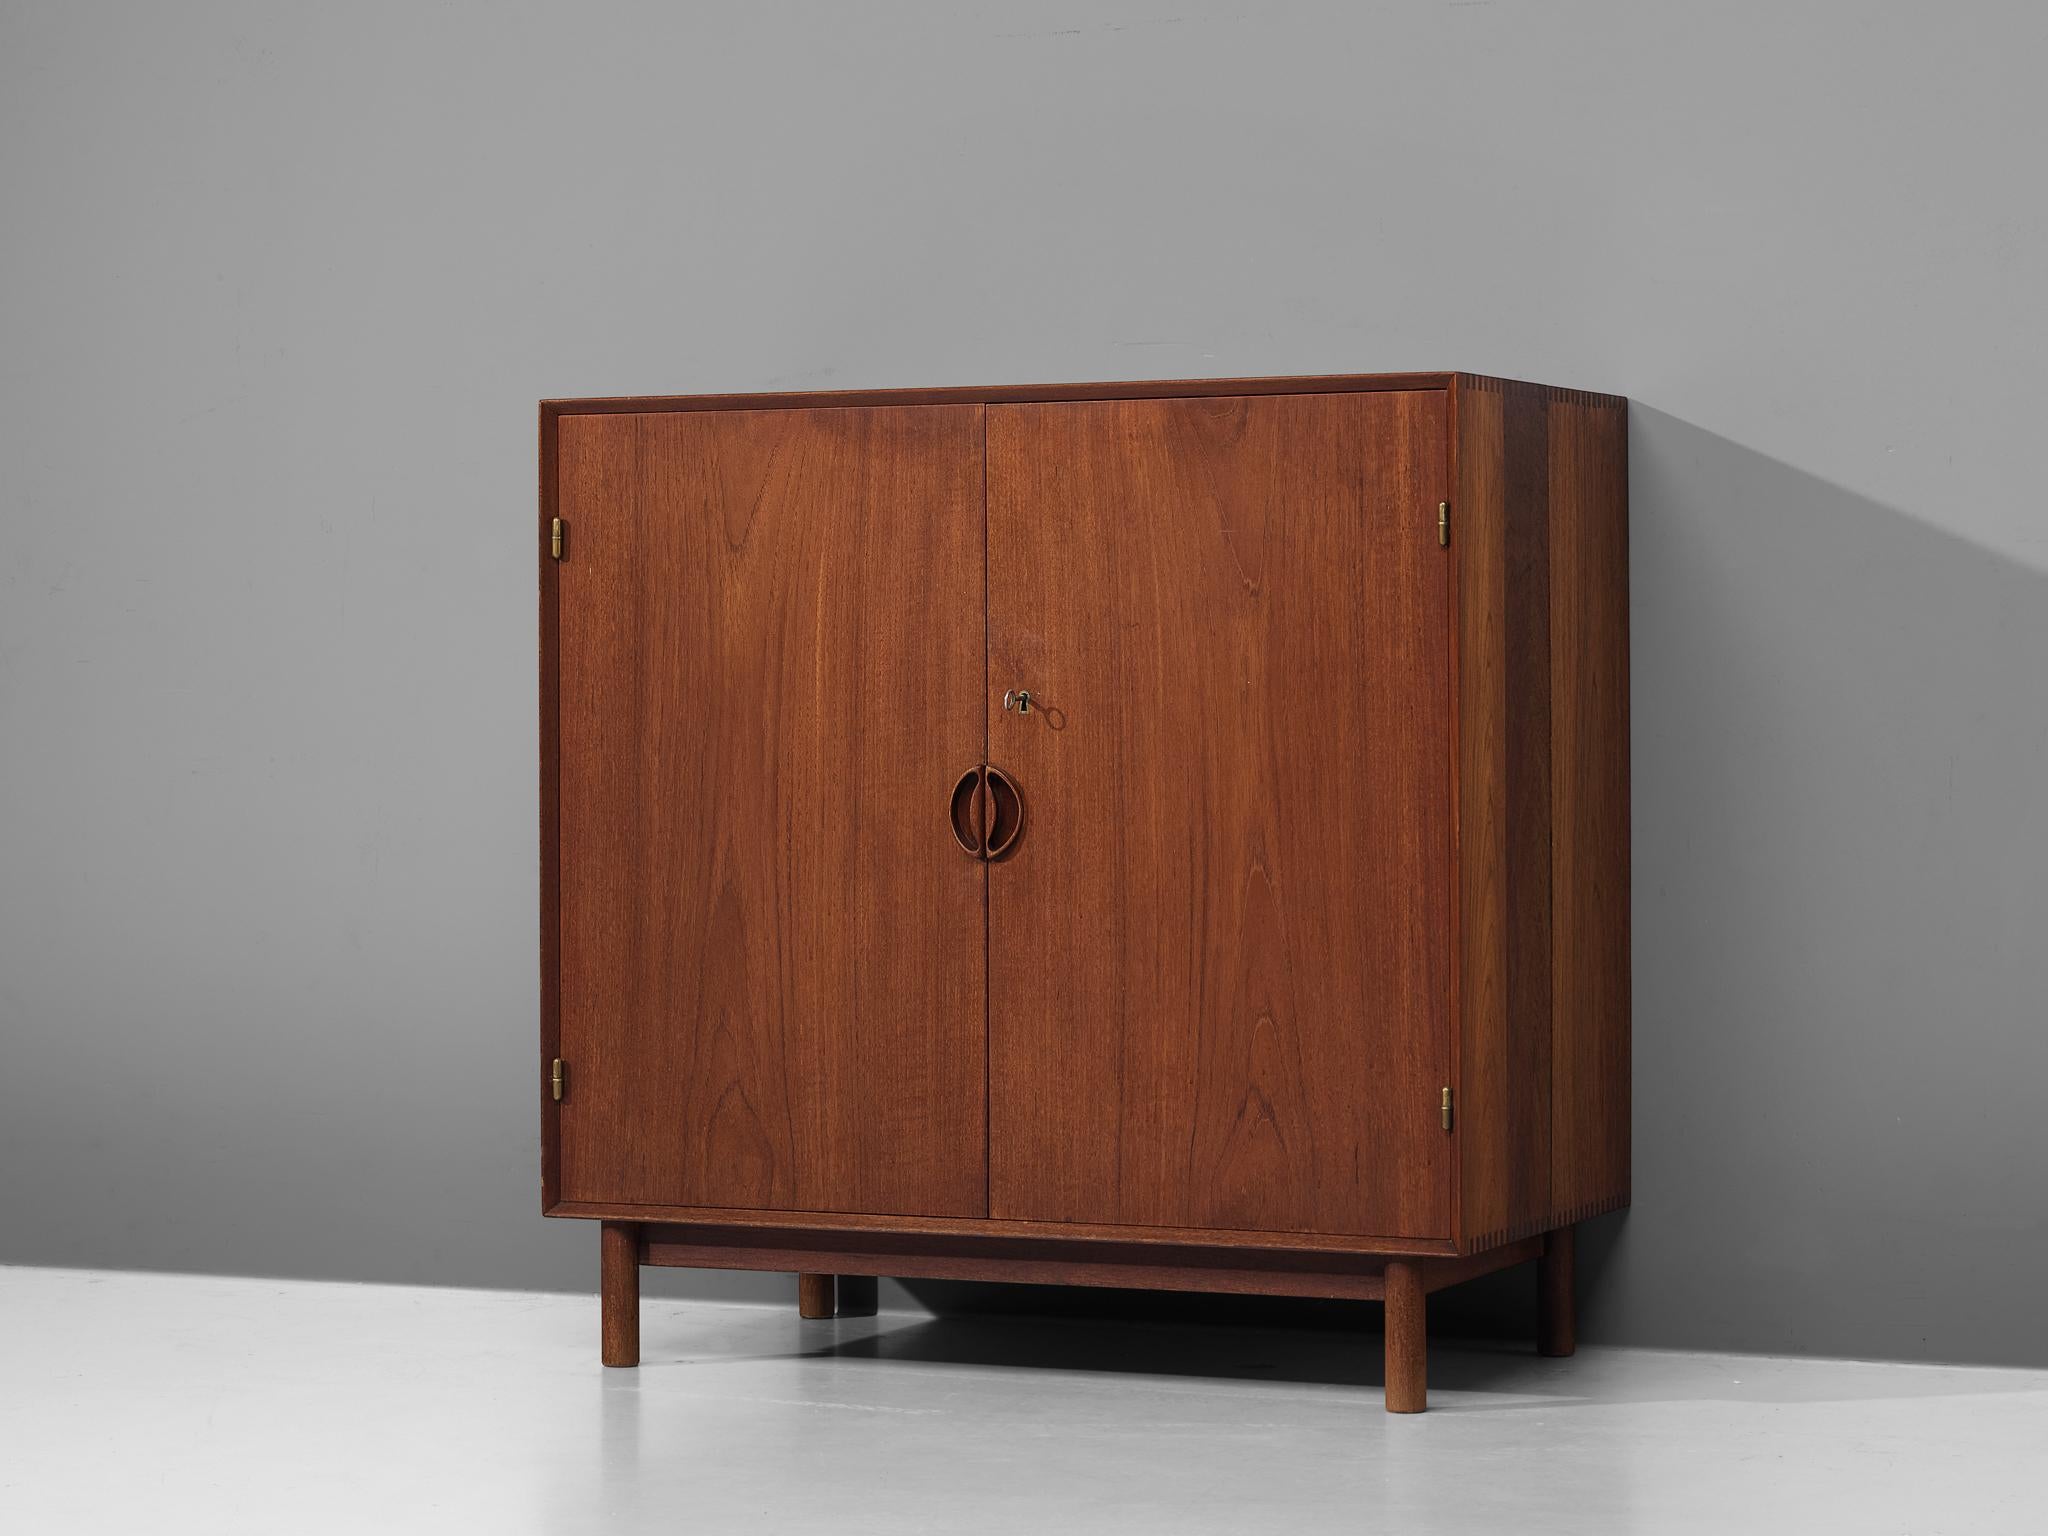 Peter Hvidt & Orla Mølgaard-Nielsen for Søborg Møbelfabrik, cabinet, teak, Denmark, 1950s.

This cabinet executed in solid teak is a design by the Danish designers Peter Hvidt and Orla Mølgaard-Nielsen. It convinces both visual and functional, as